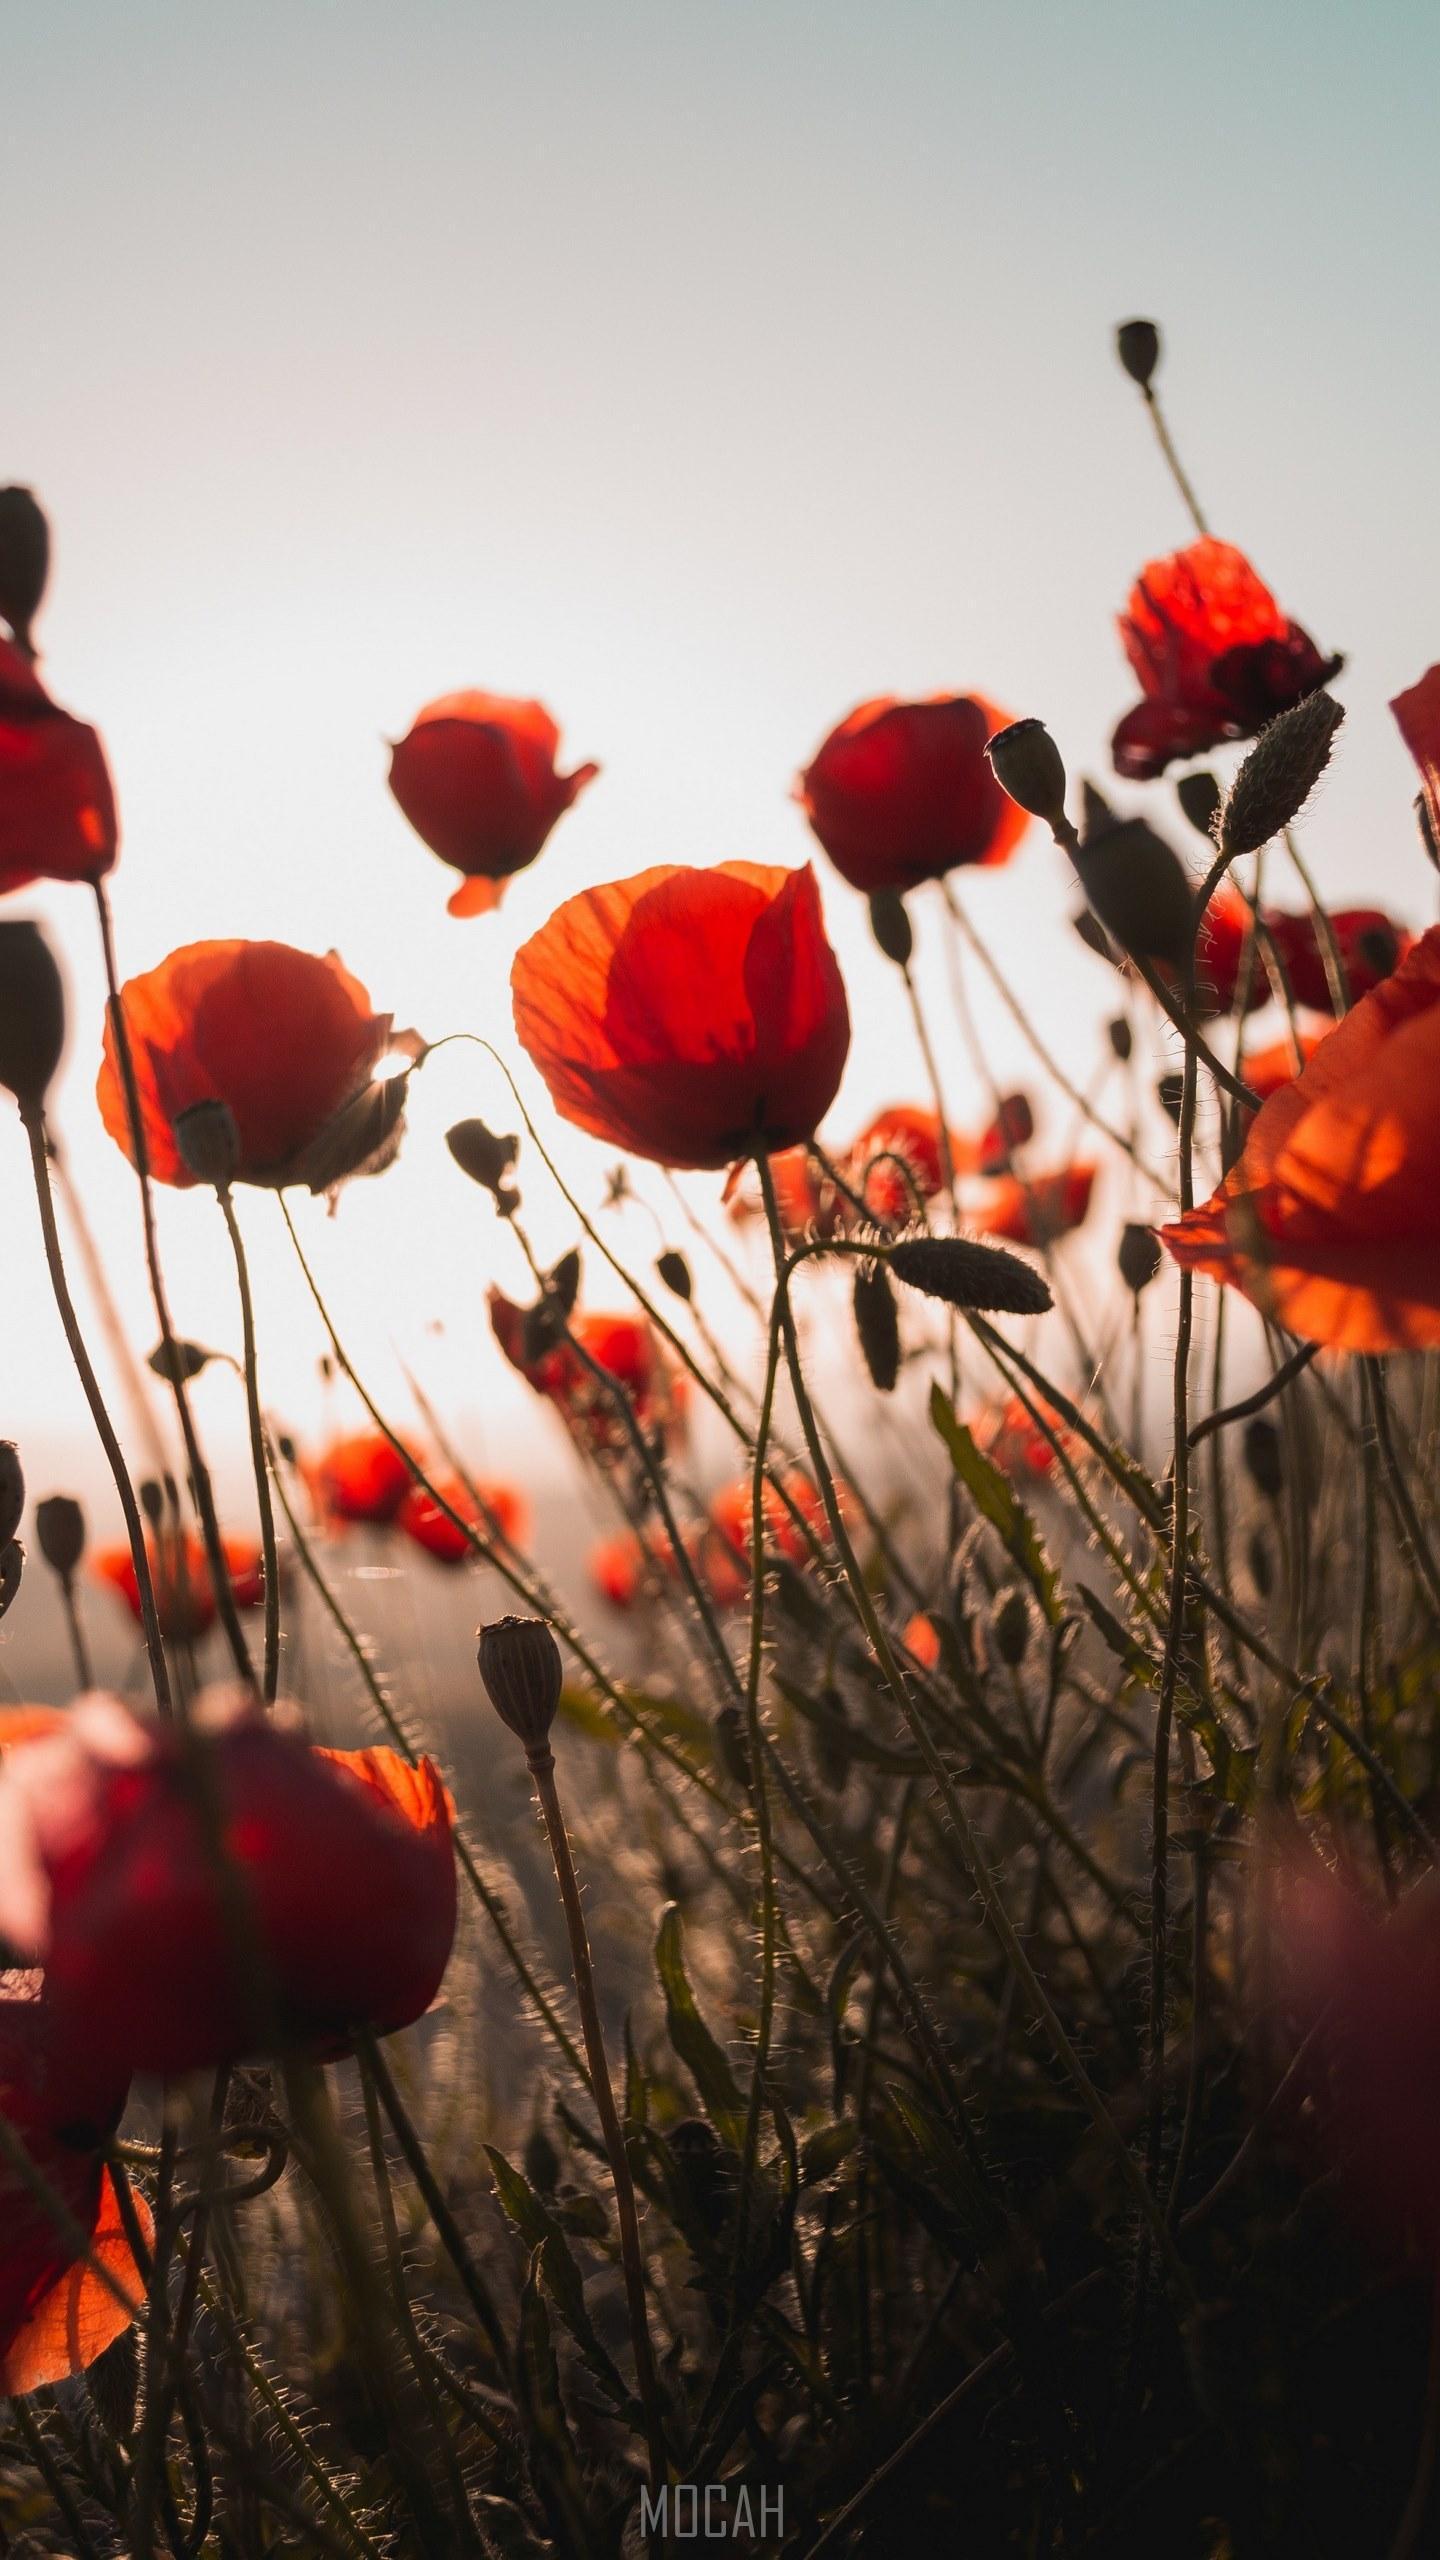 HD wallpaper, A Group Of Red Wildflowers, Poppies, 1440X2560, Htc 10 Evo Wallpaper 1080P